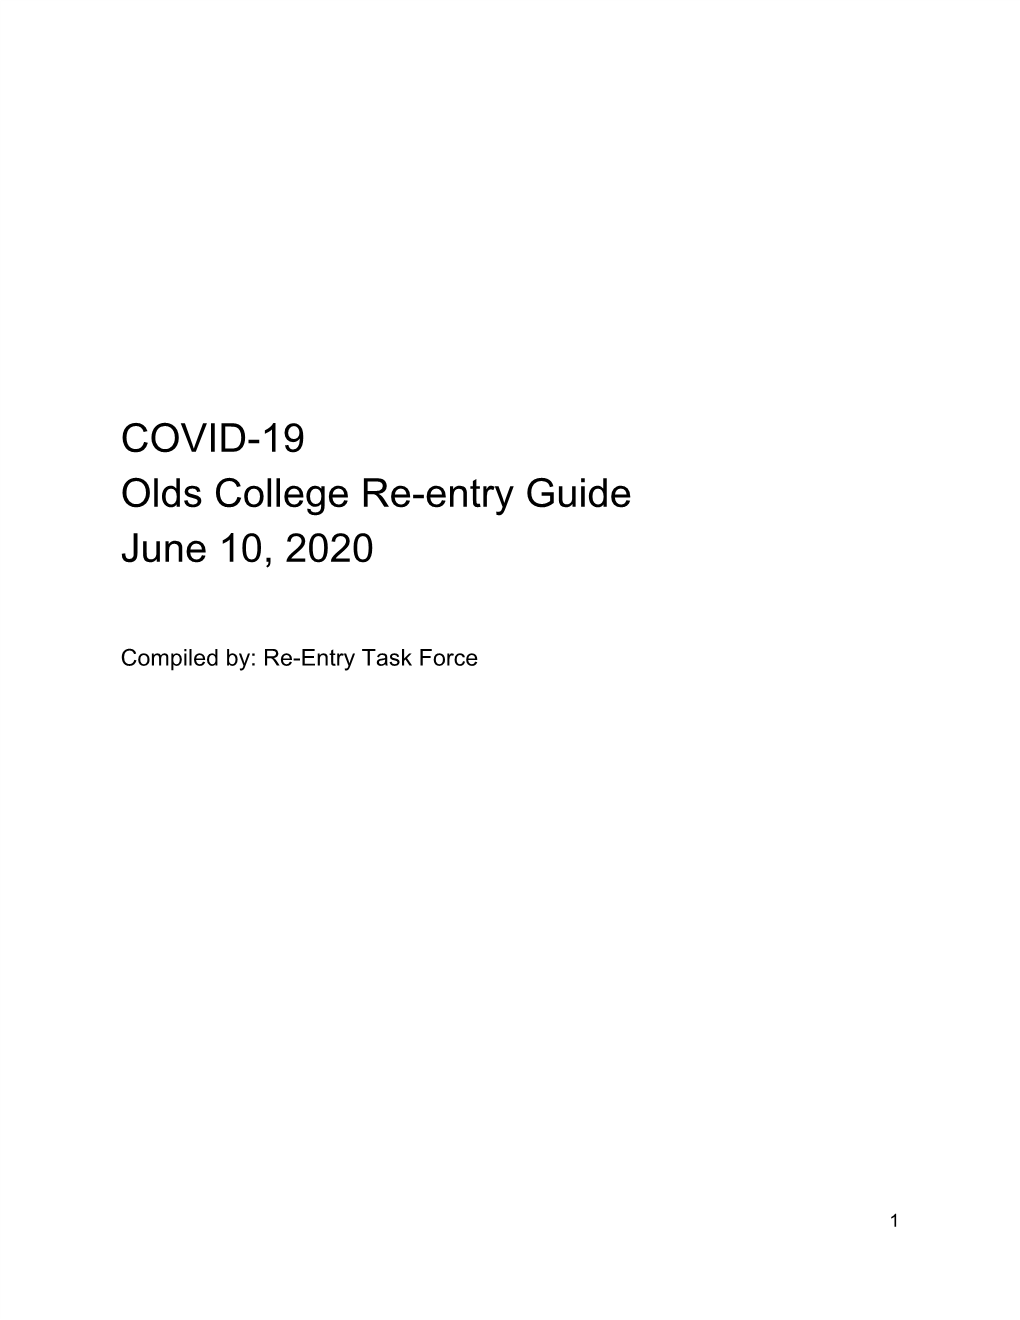 COVID-19 Olds College Re-Entry Guide June 10, 2020